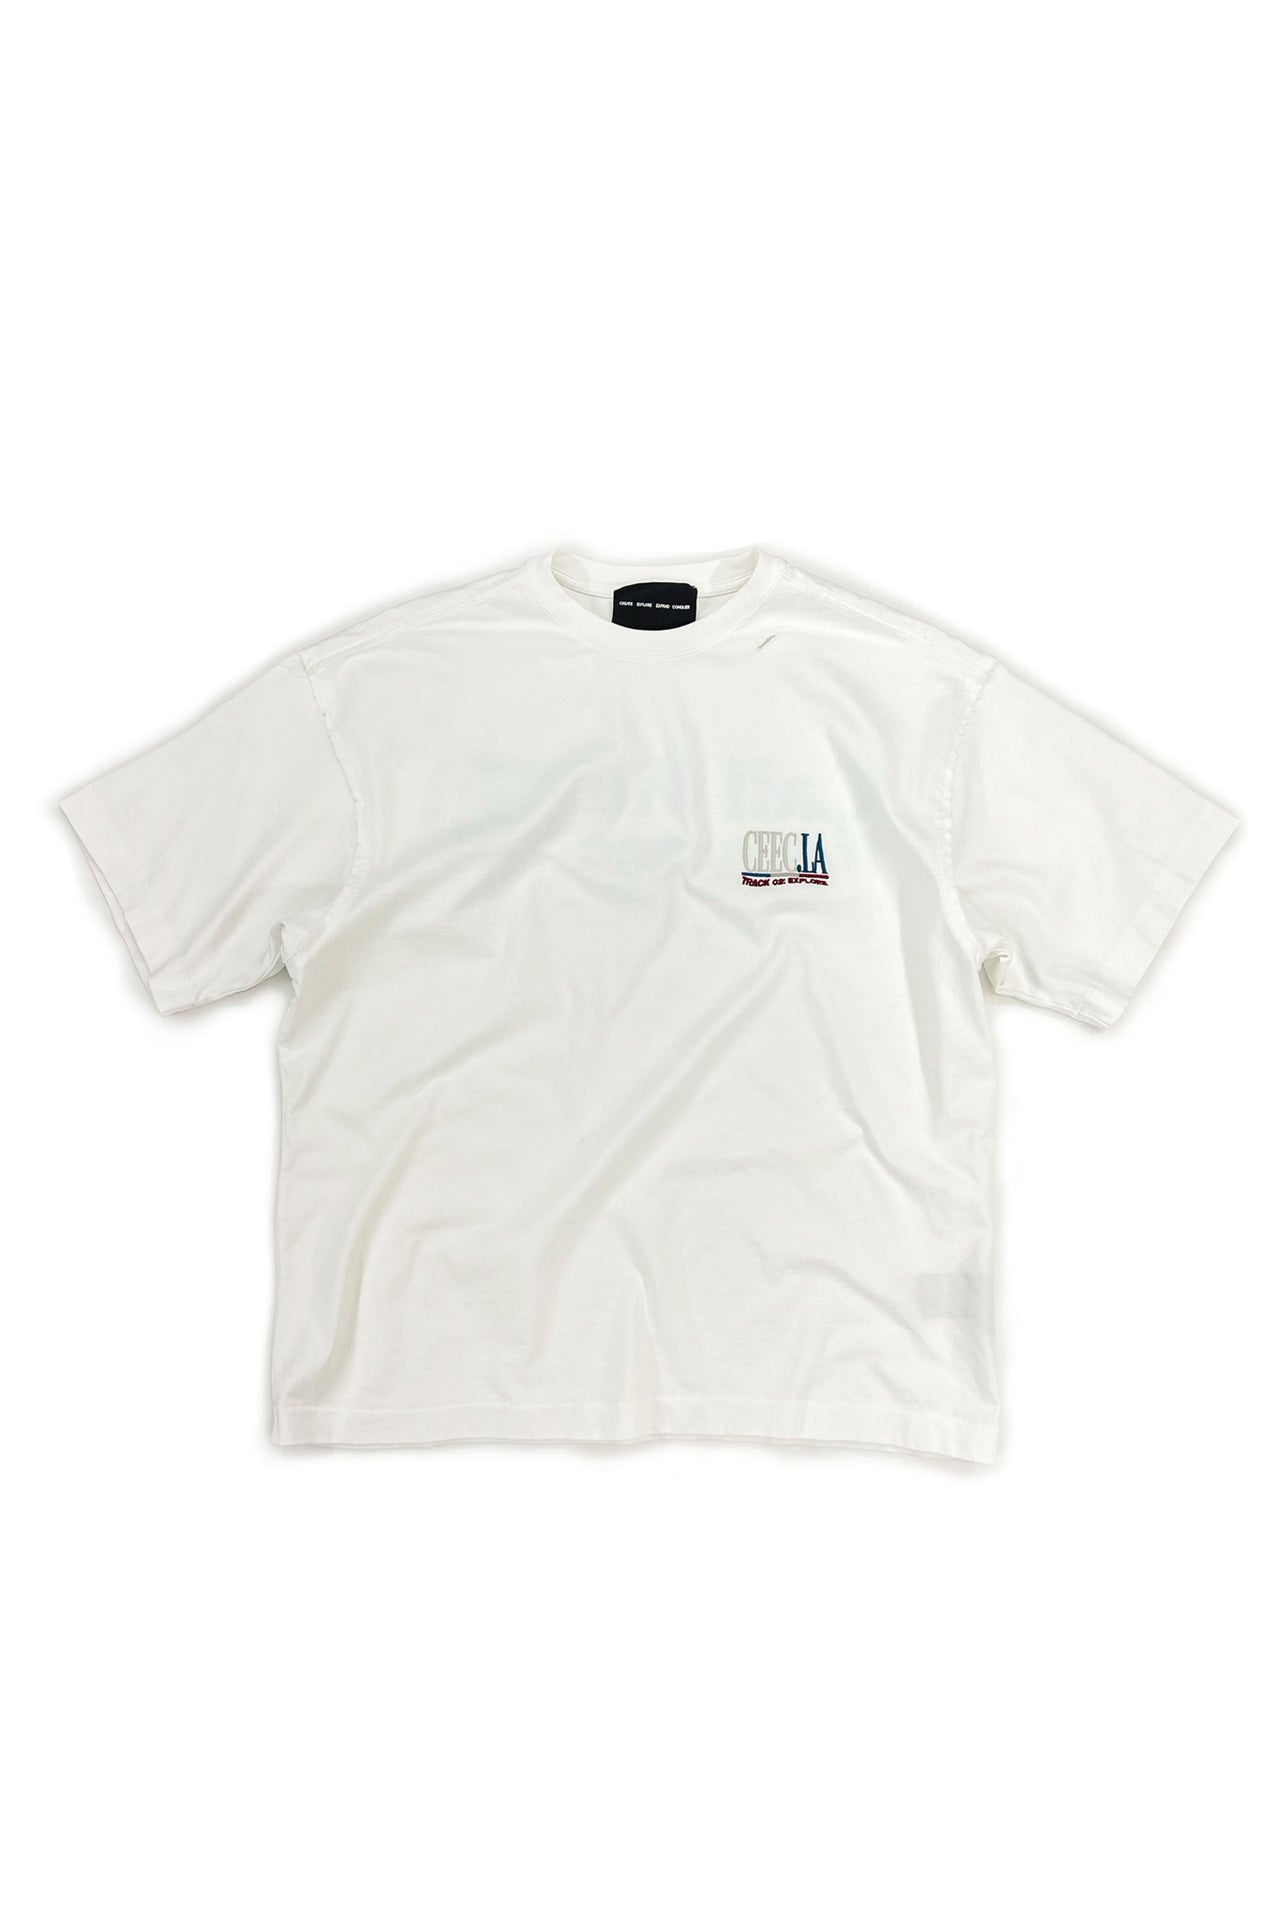 1st Anniversary "Call me if you see" Logo Tee in White